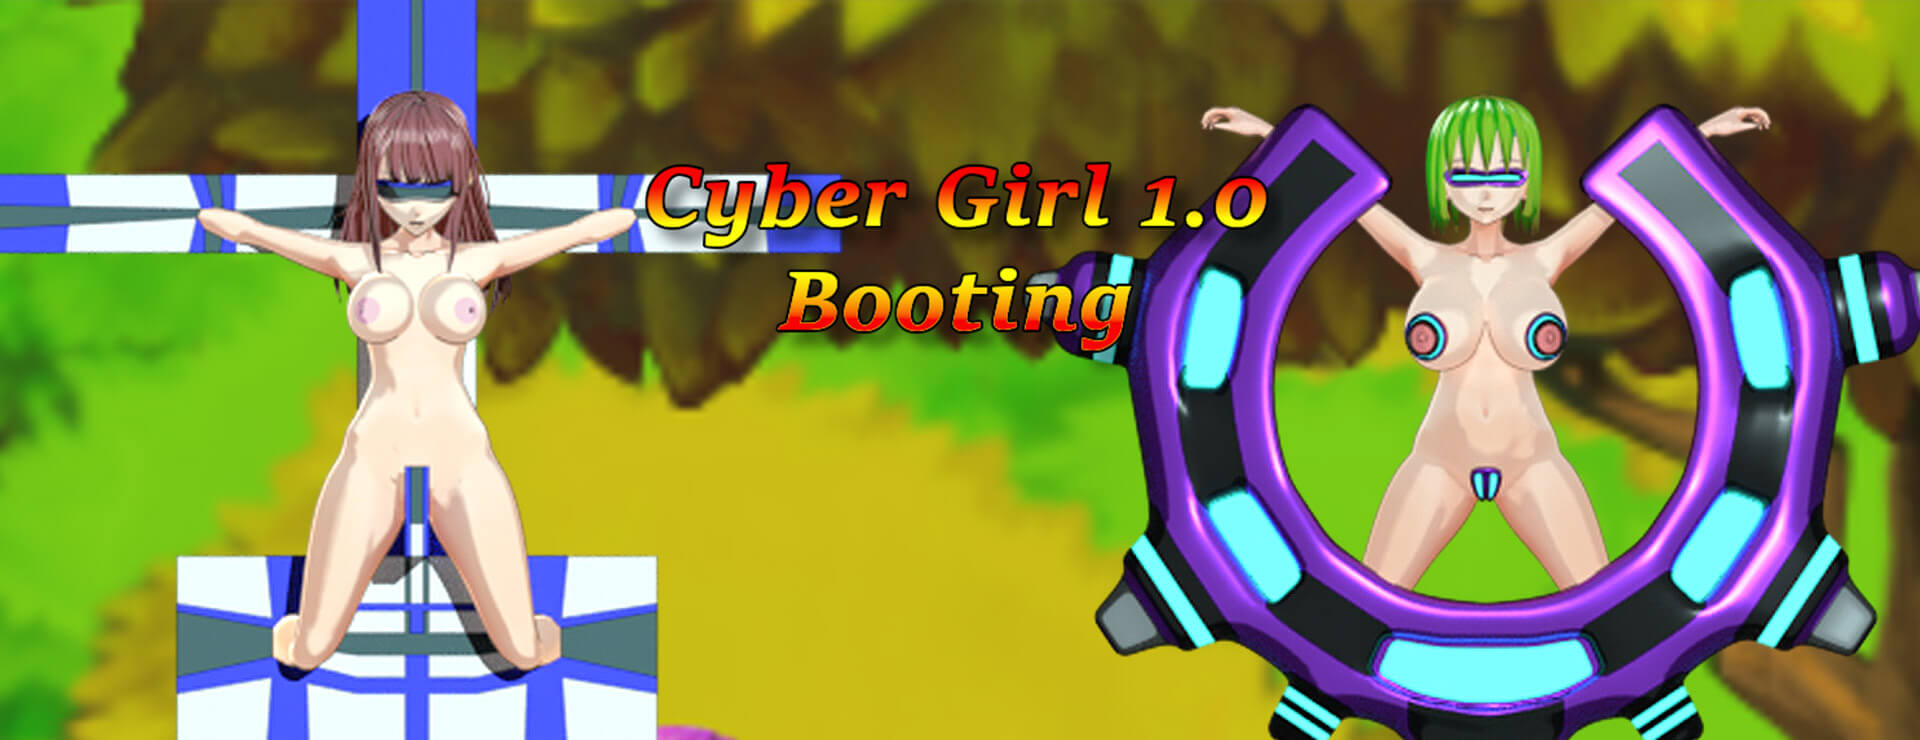 Cyber Girl 1.0: Booting - Action Aventure Jeu